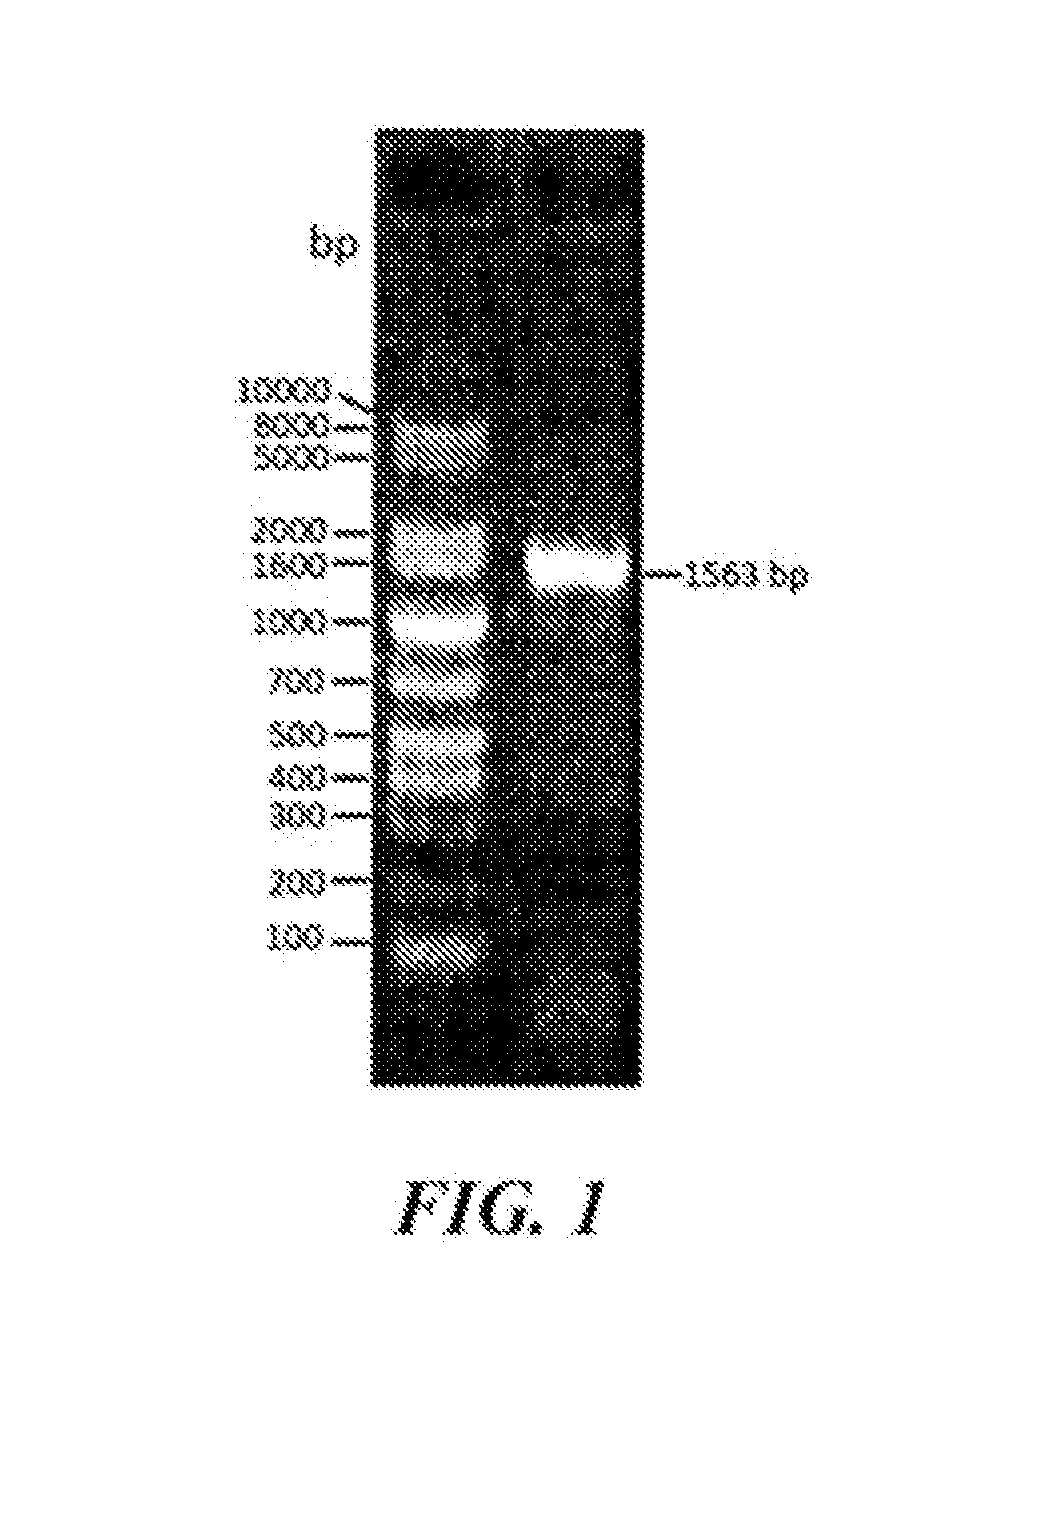 Sirna molecule for inhibiting growth of melanin and application thereof